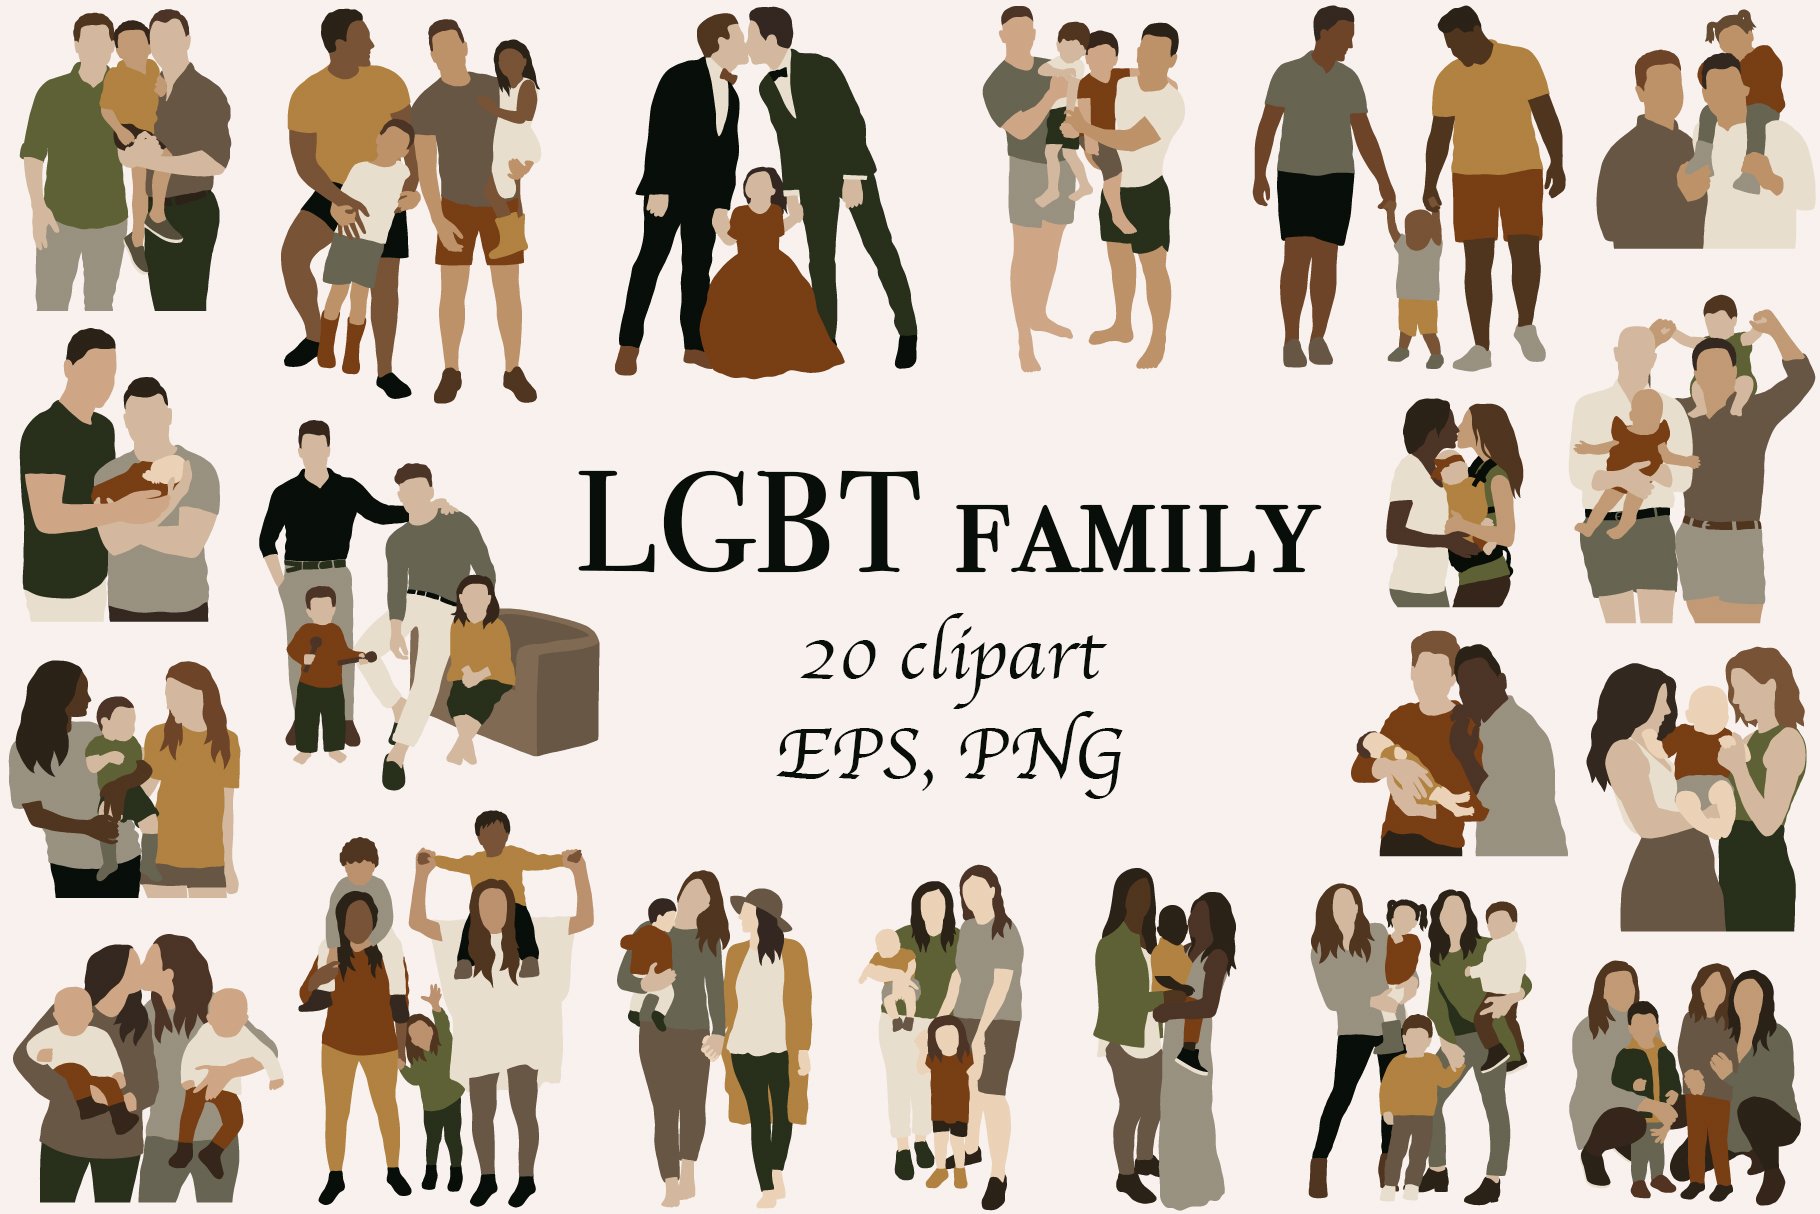 Abstract LGBT family clipart cover image.